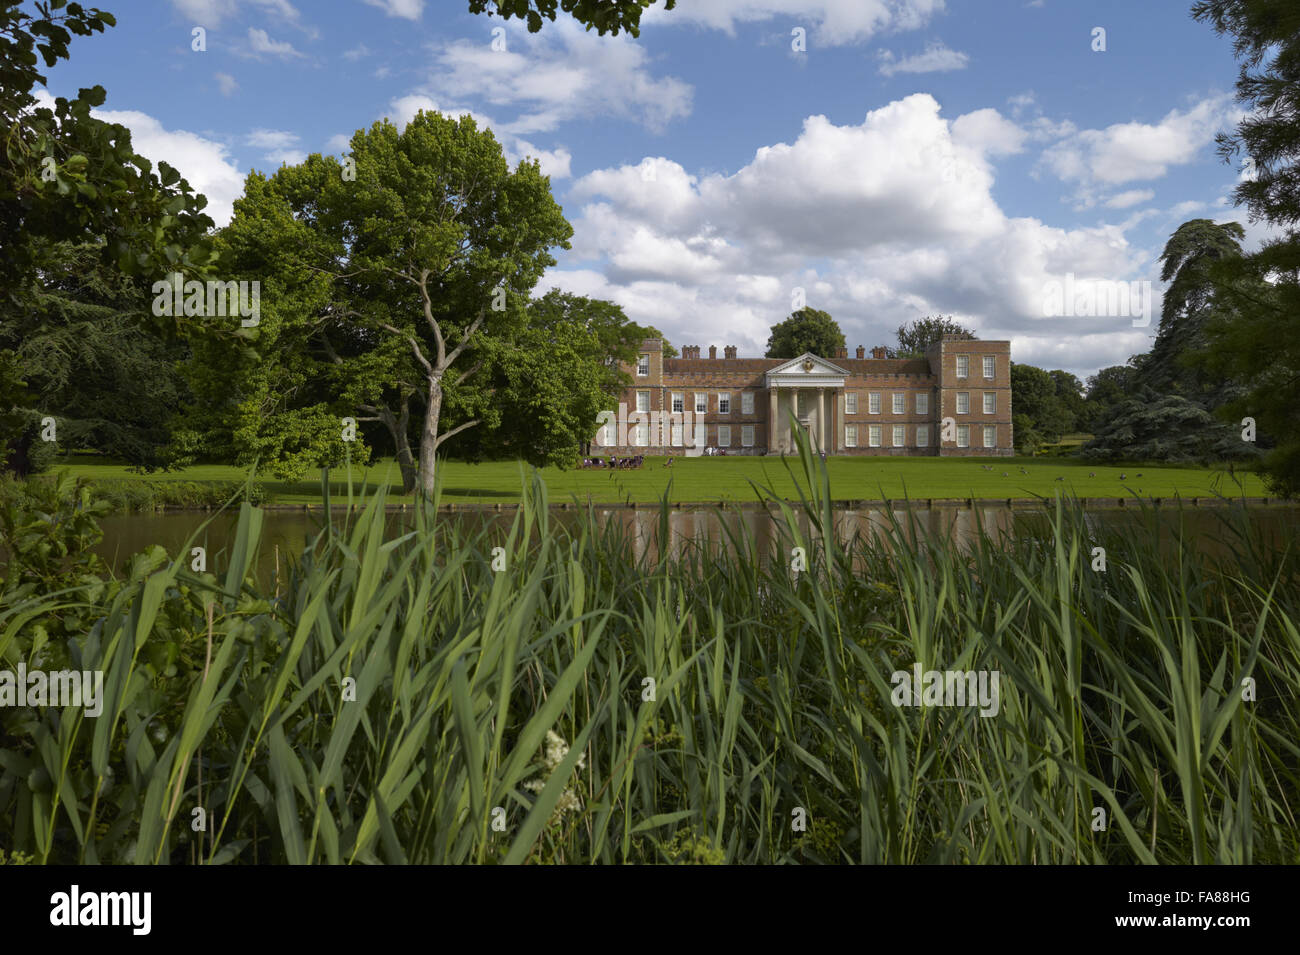 View of the north front of The Vyne and the lake. The house was built in the early 16th century for Lord Sandys, Henry VIII's Lord Chamberlain in 1526. Stock Photo